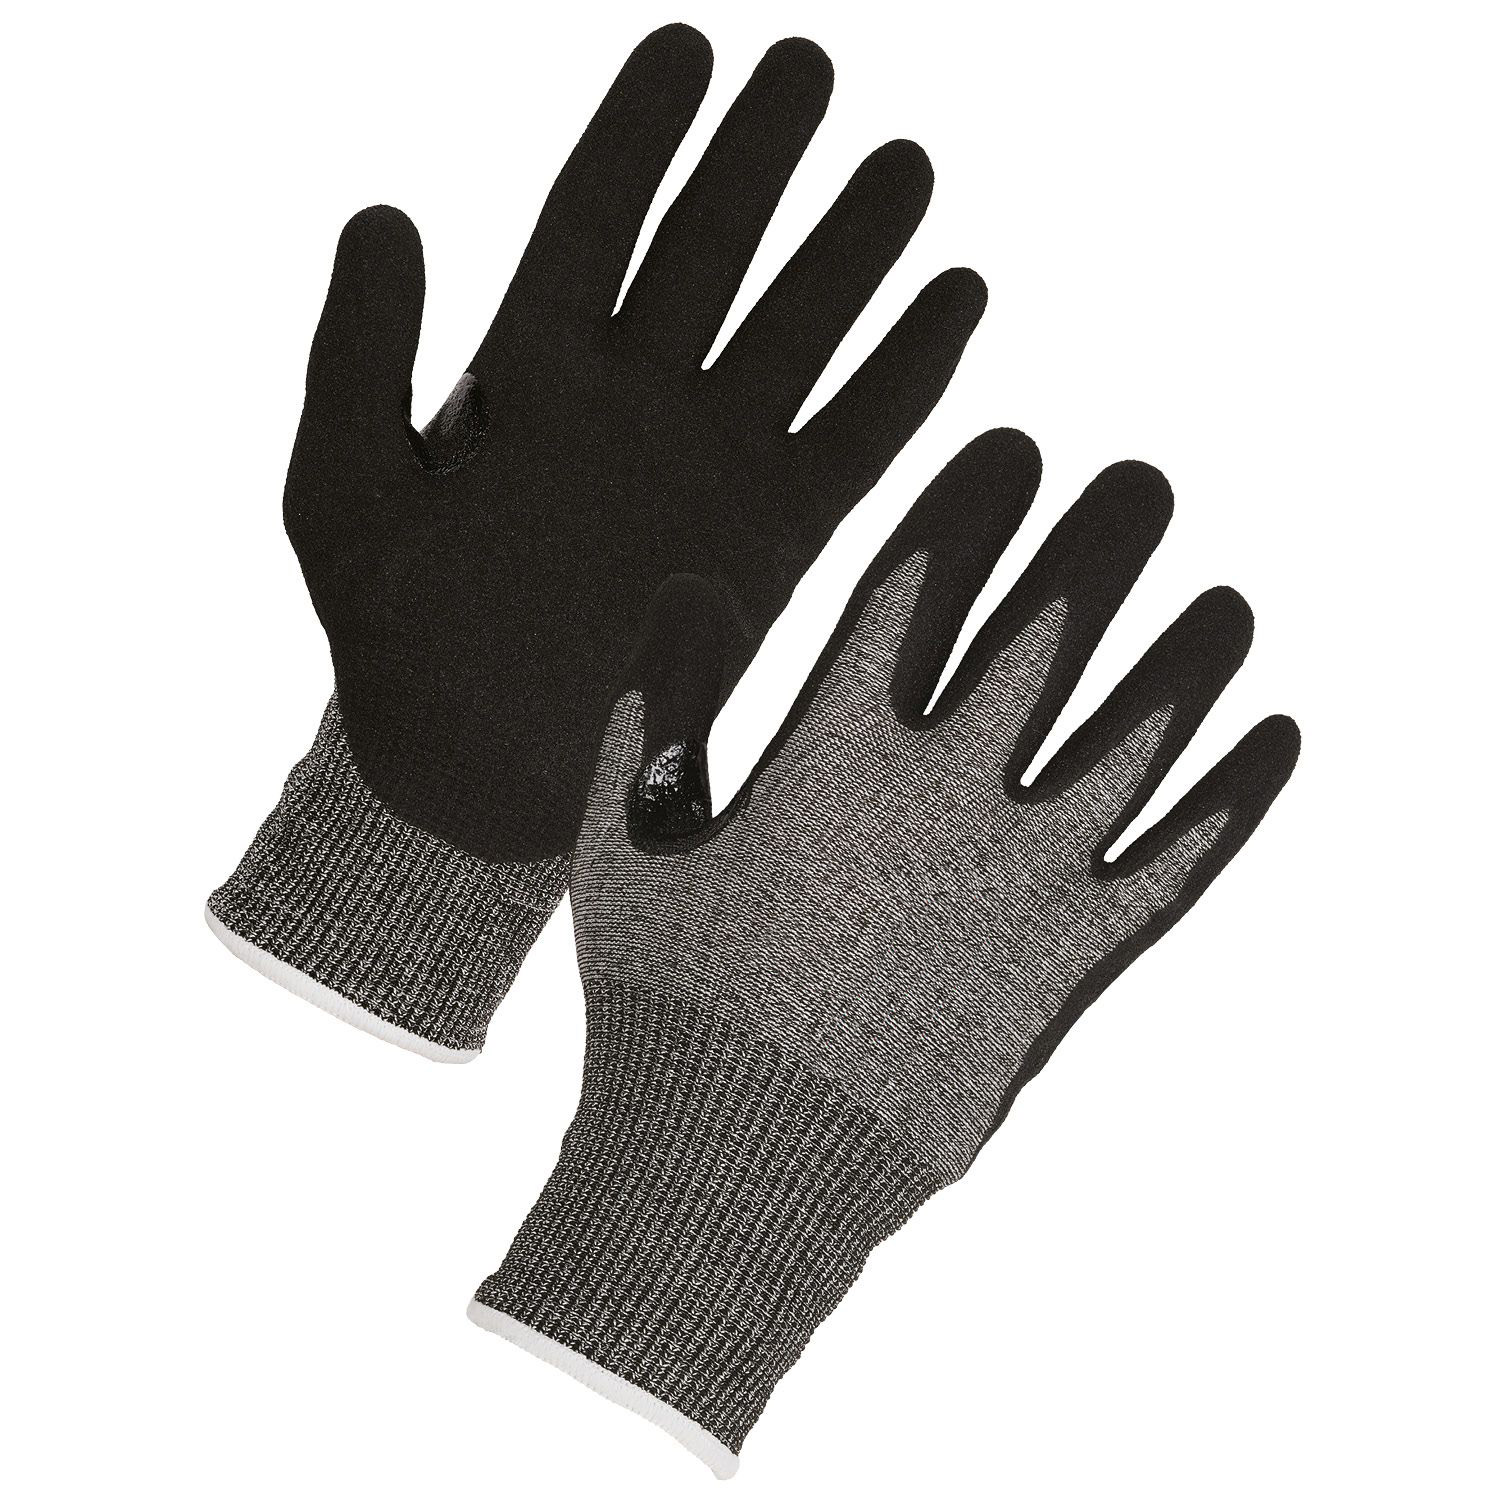 Anti-Cut Oil-Resistant Water Repellent Gloves with Palm Coating